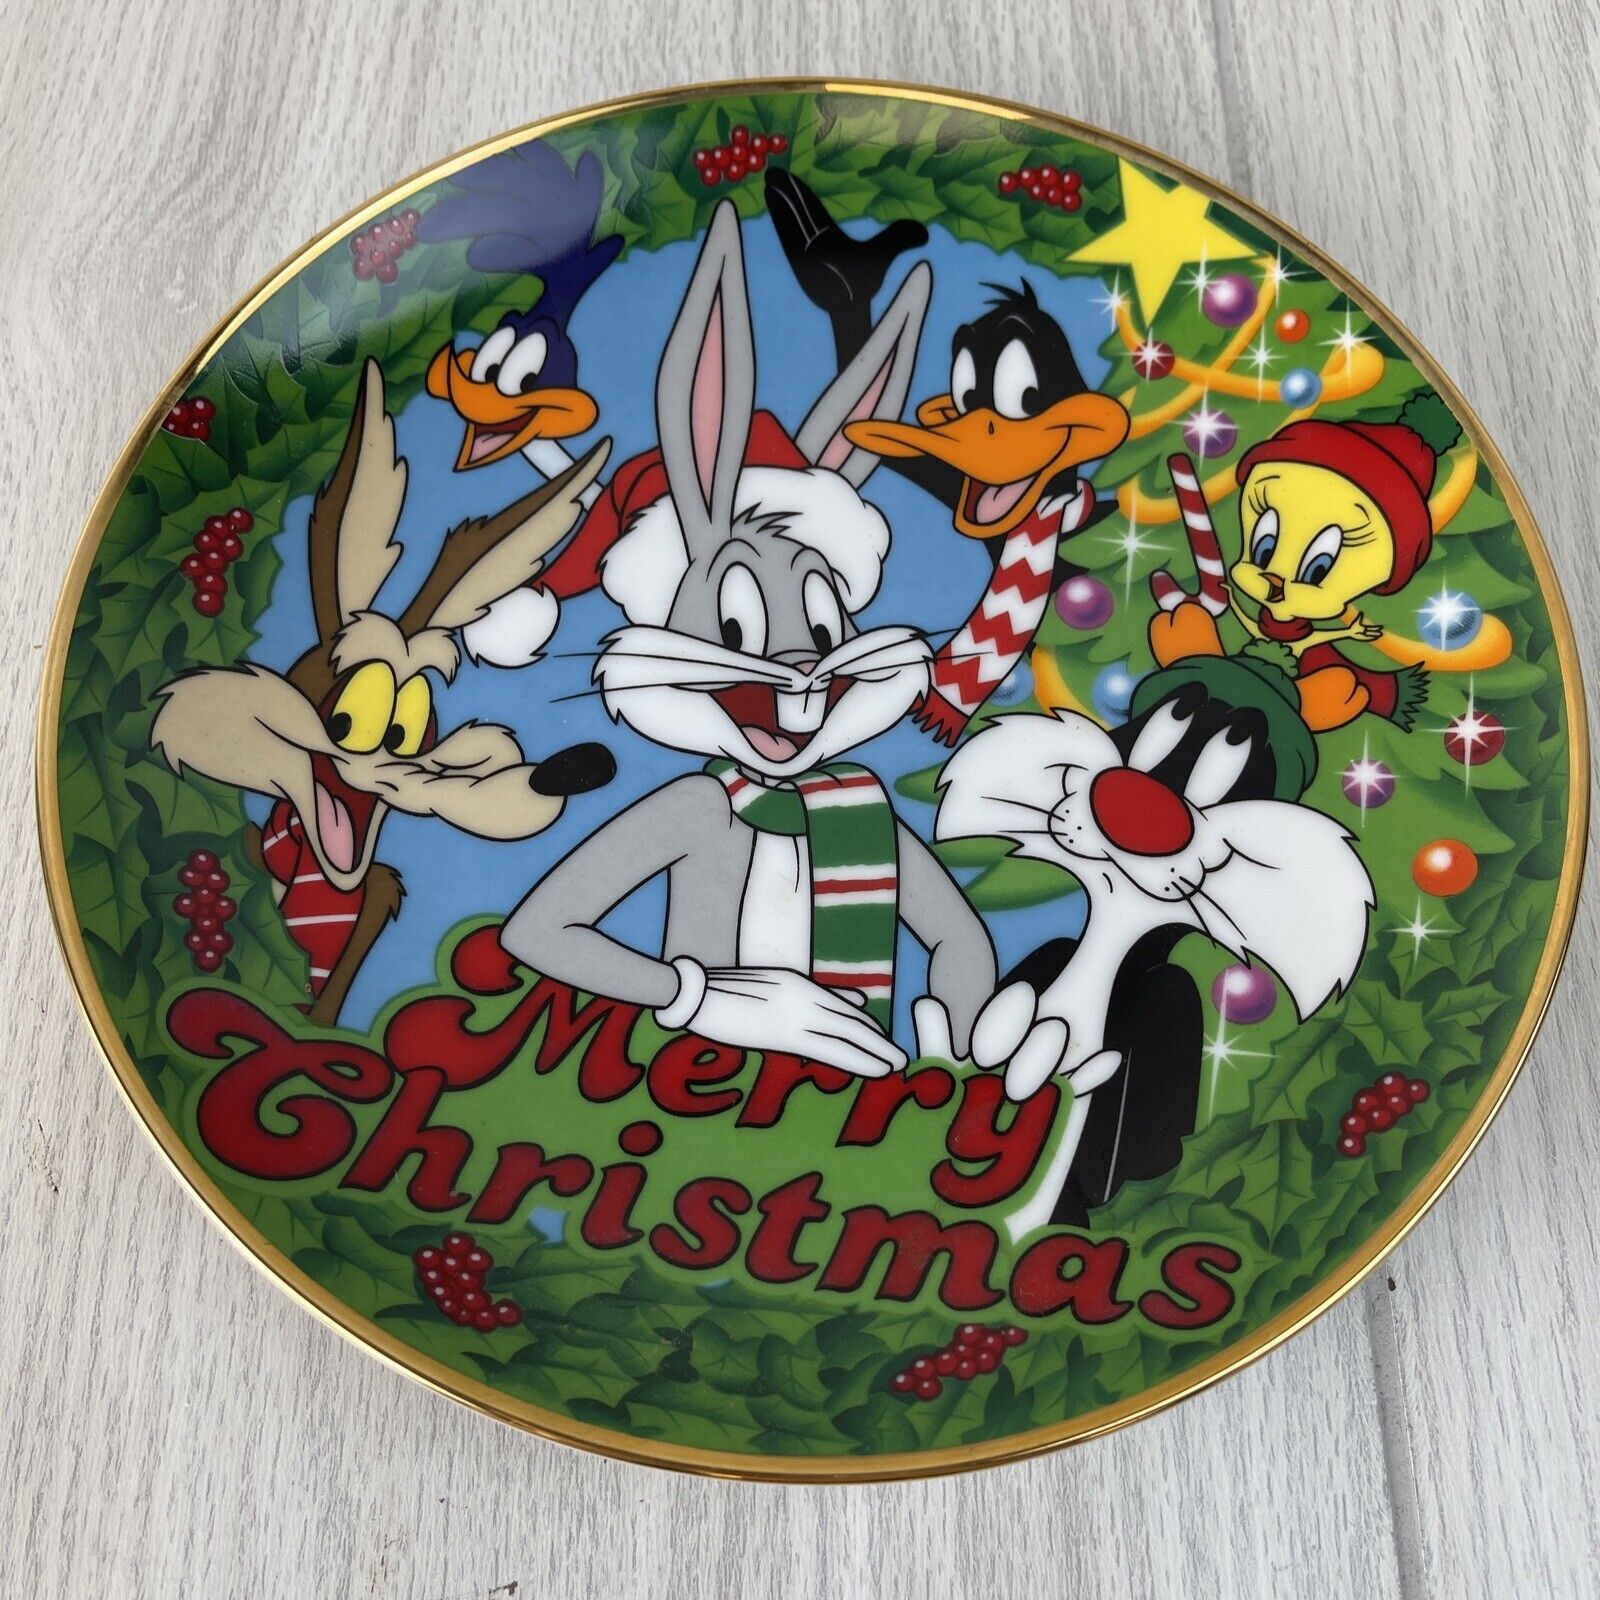 Looney Tunes Christmas Collectors Plate 1991 Limited Edition Warner Brothers